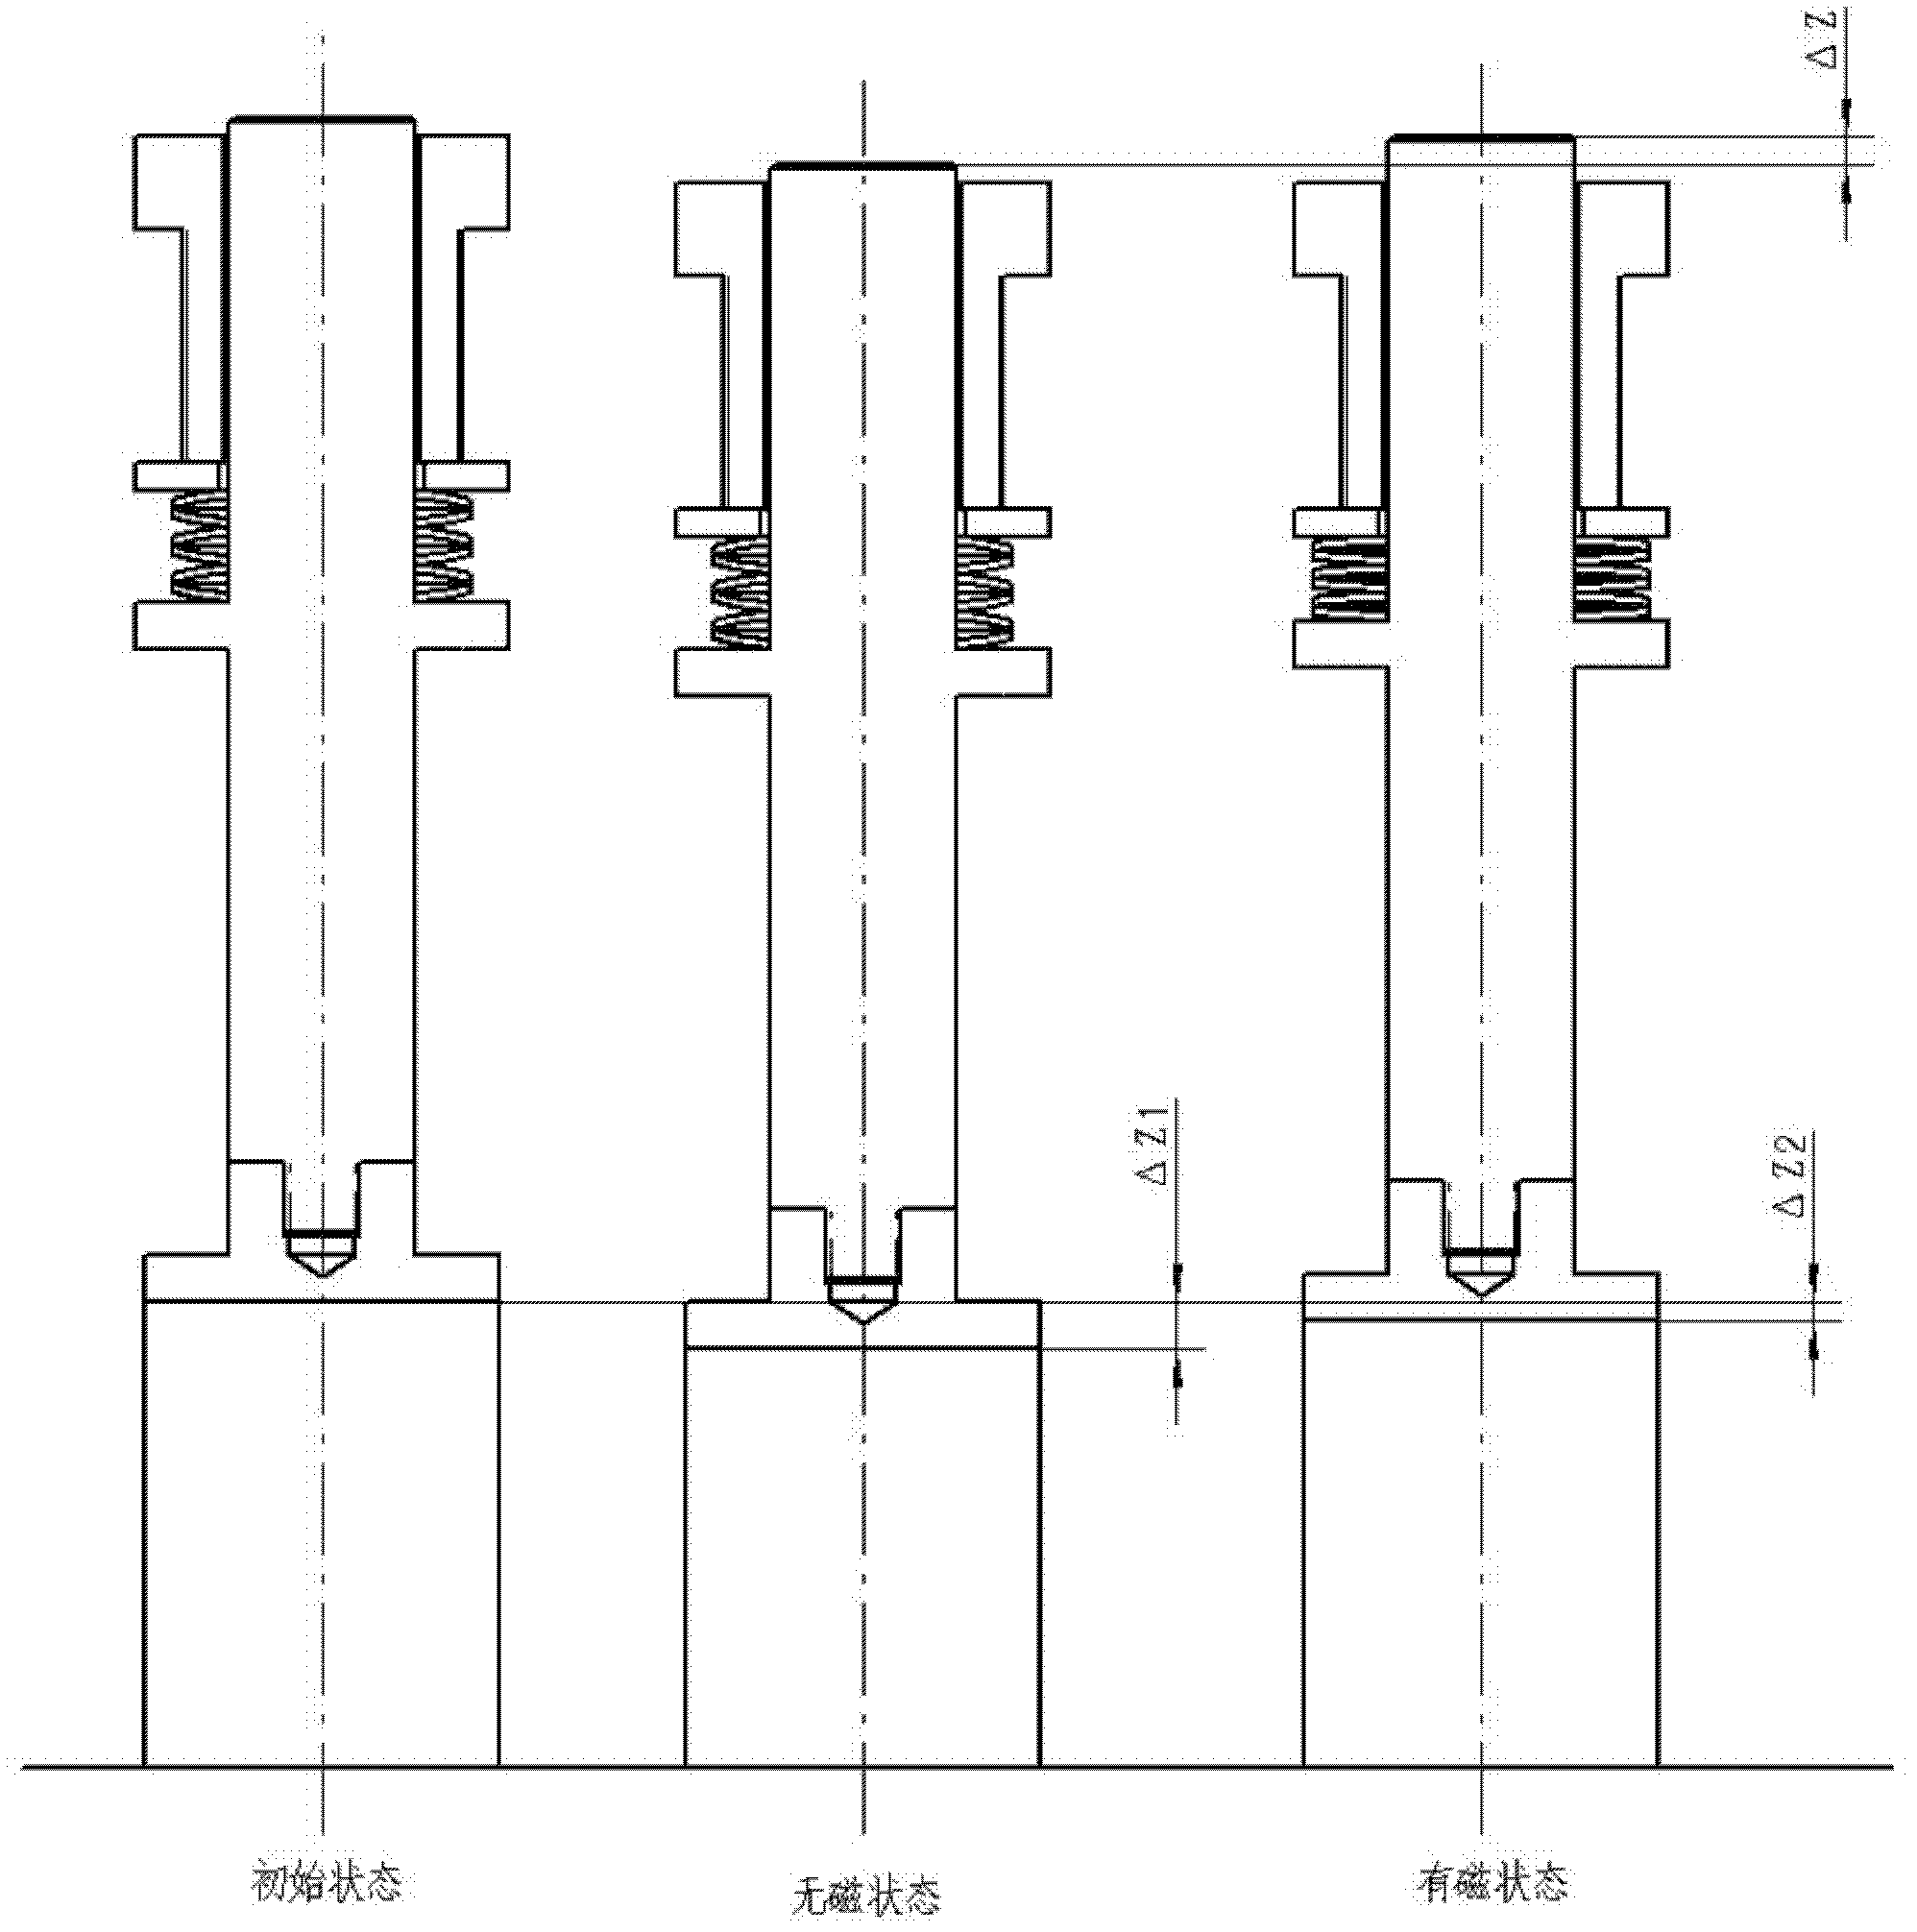 Squeezed micro-displacement actuator of magnetorheological elastomer